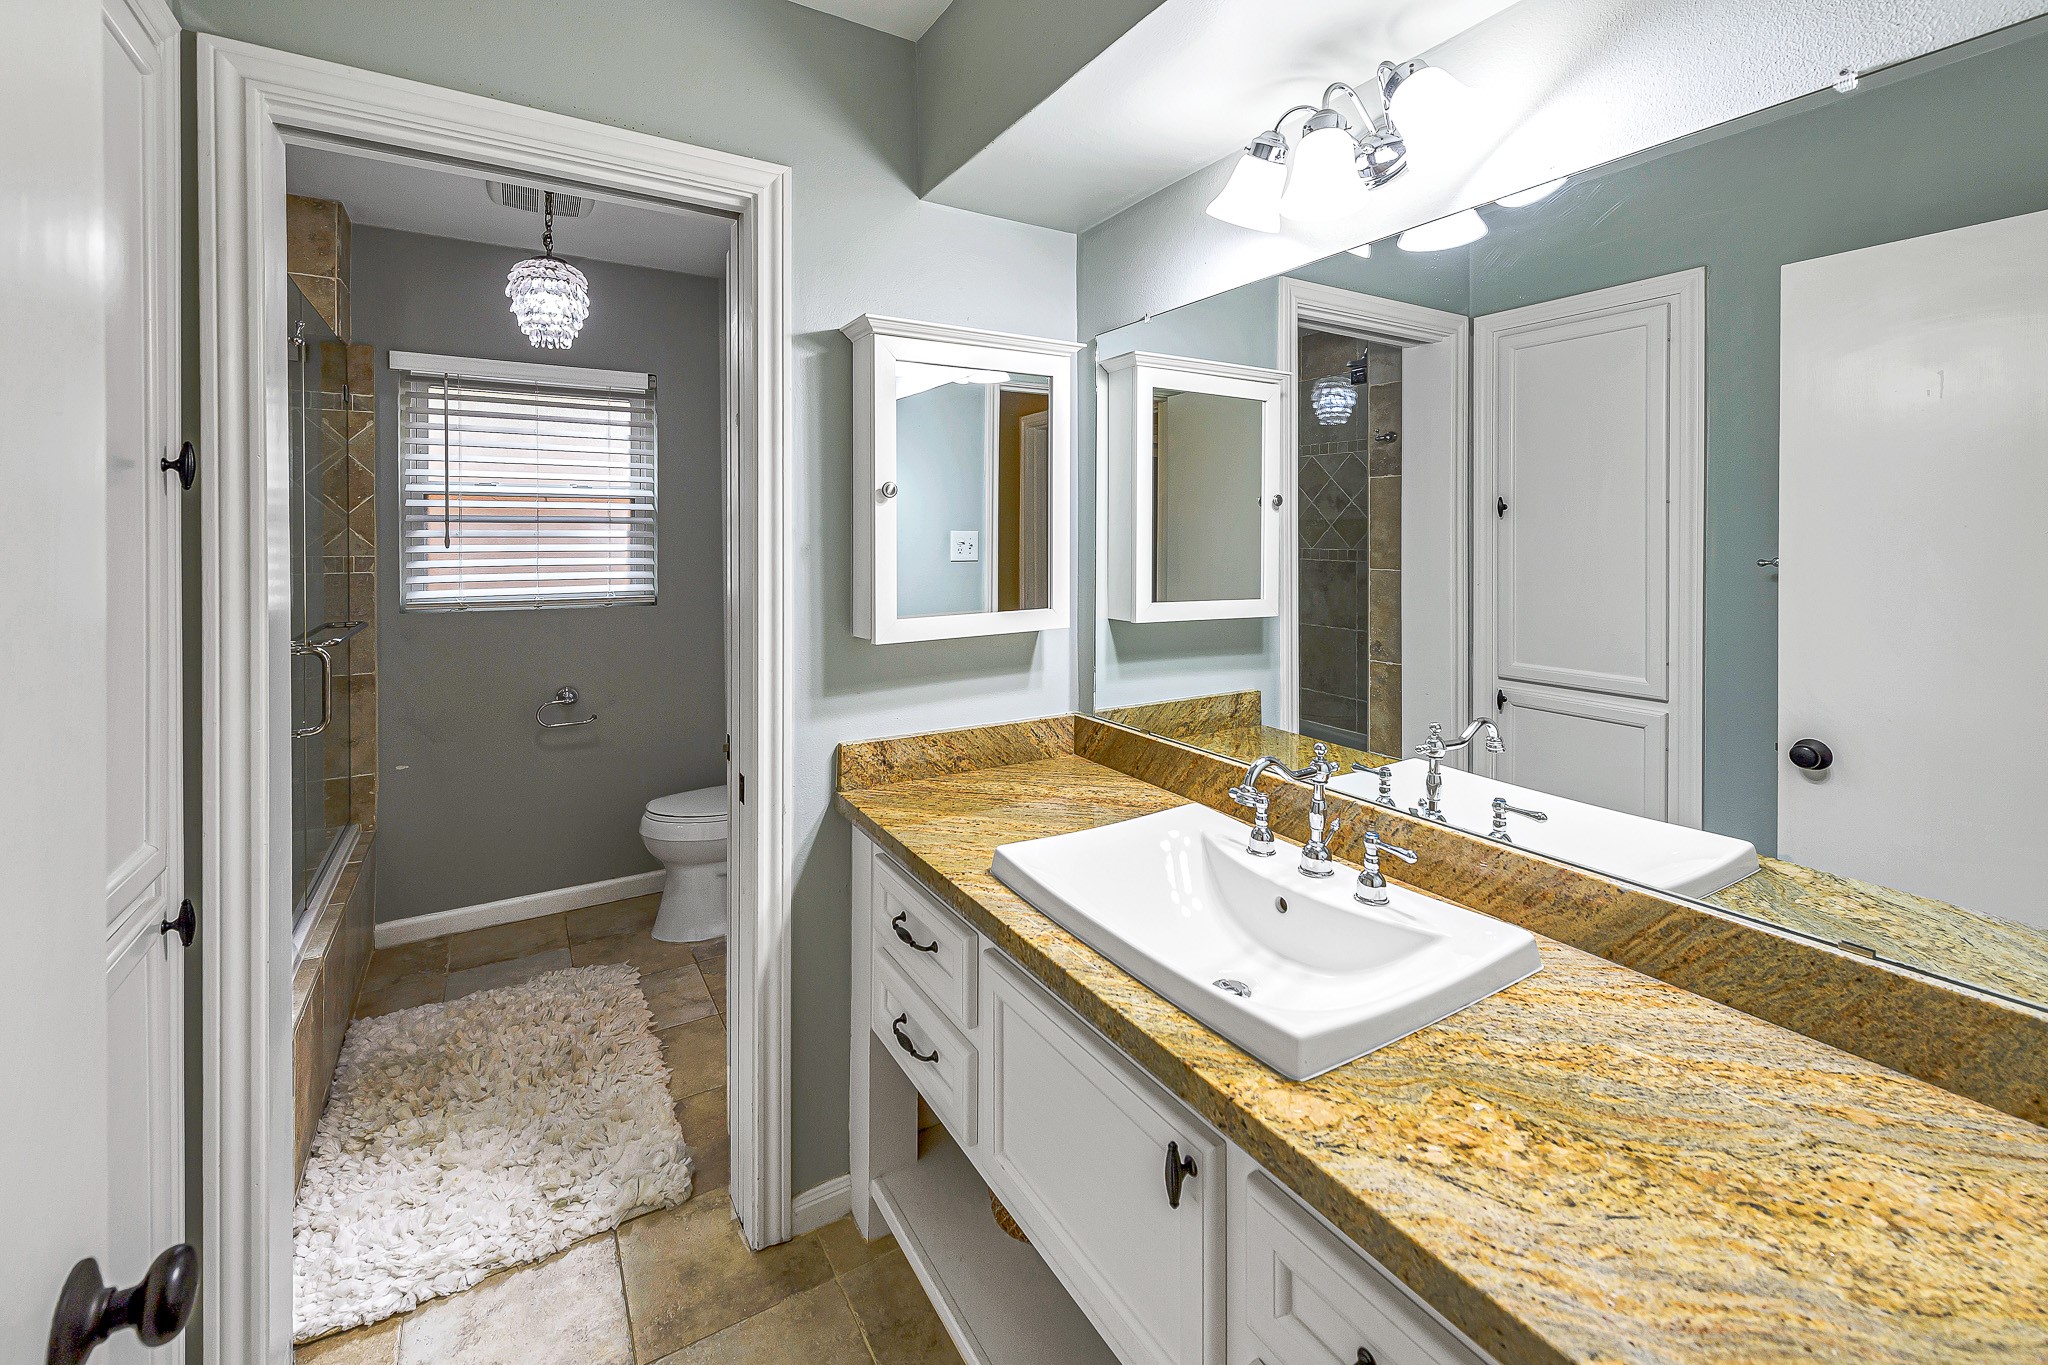 The Hollywood style bathroom allows the convenience of seperate sinks and storage areas.